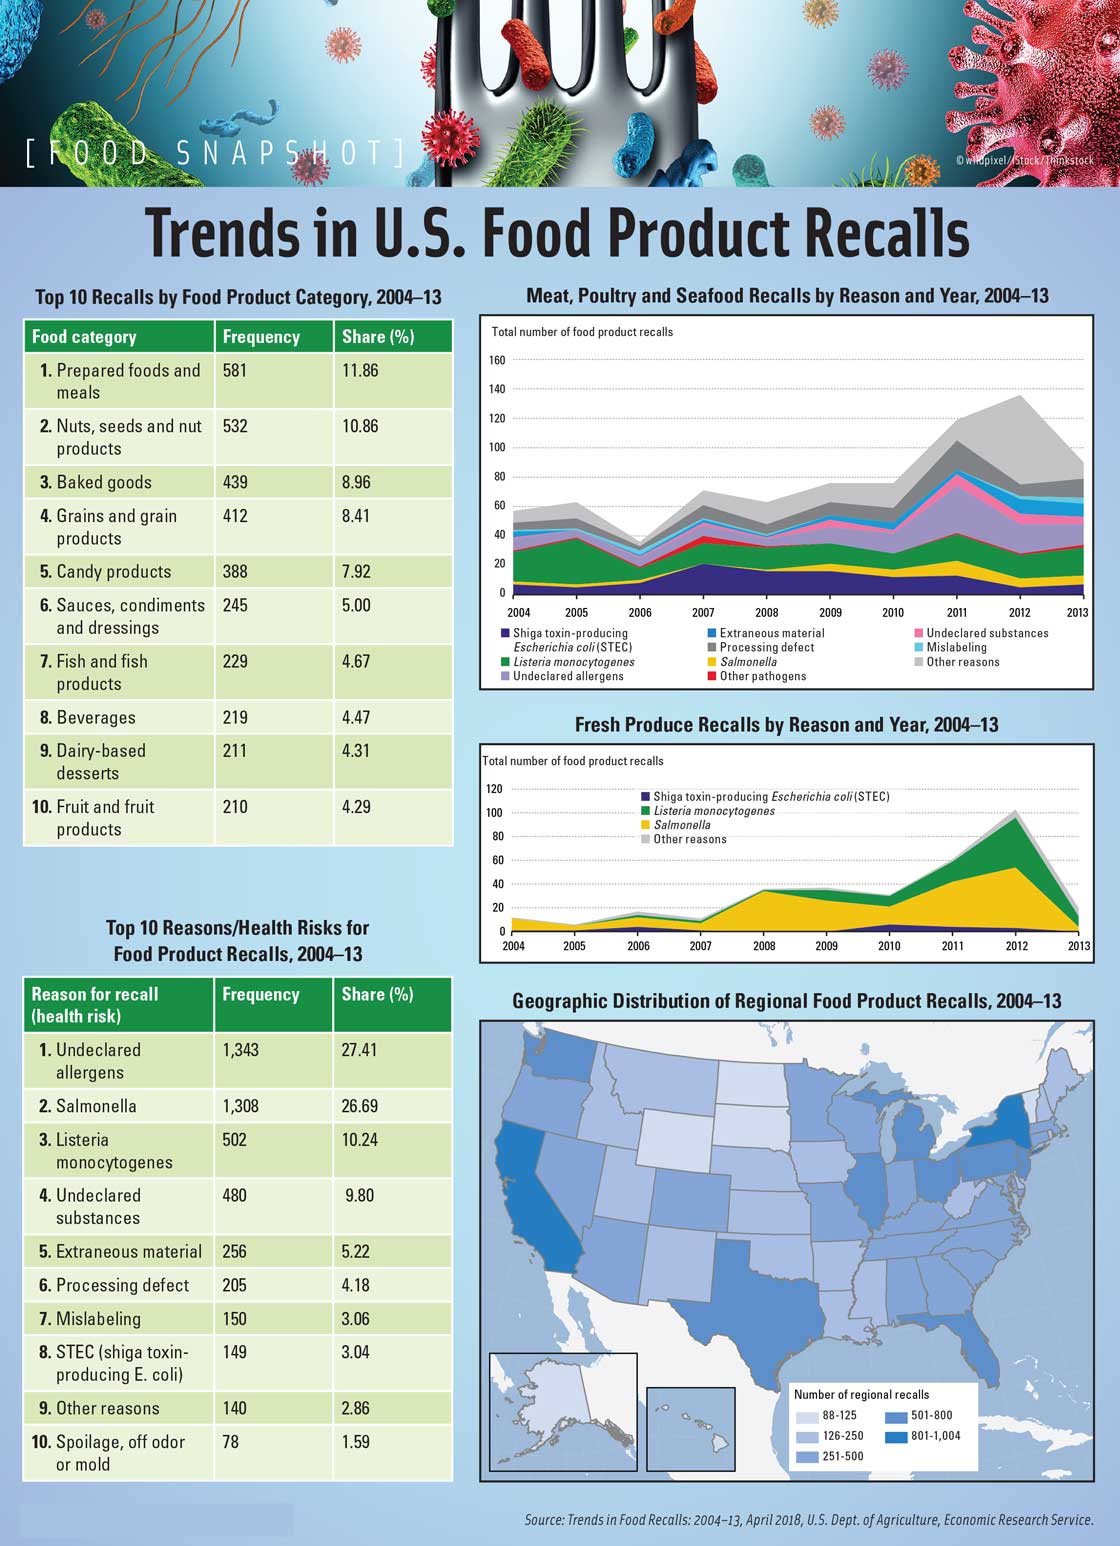 Trends in U.S. Food Product Recalls. Source: Trends in Food Recalls: 2004–13, April 2018, U.S. Dept. of Agriculture, Economic Research Service.